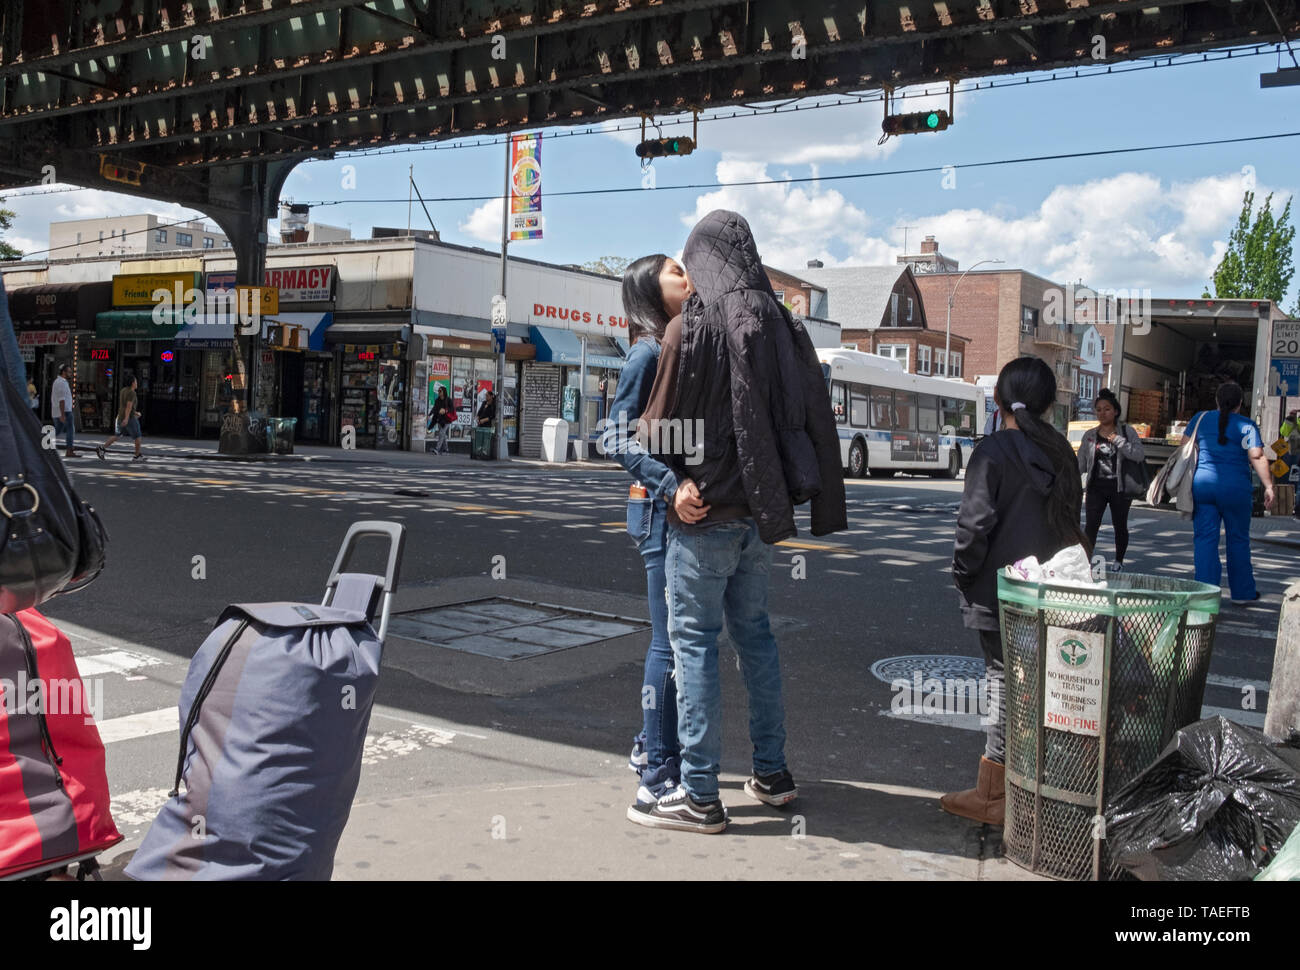 A busy street scene under the elevated subway with a couple kissing, pedestrians, luggage & trash. In Jackson Heights, Queens, New York City. Stock Photo